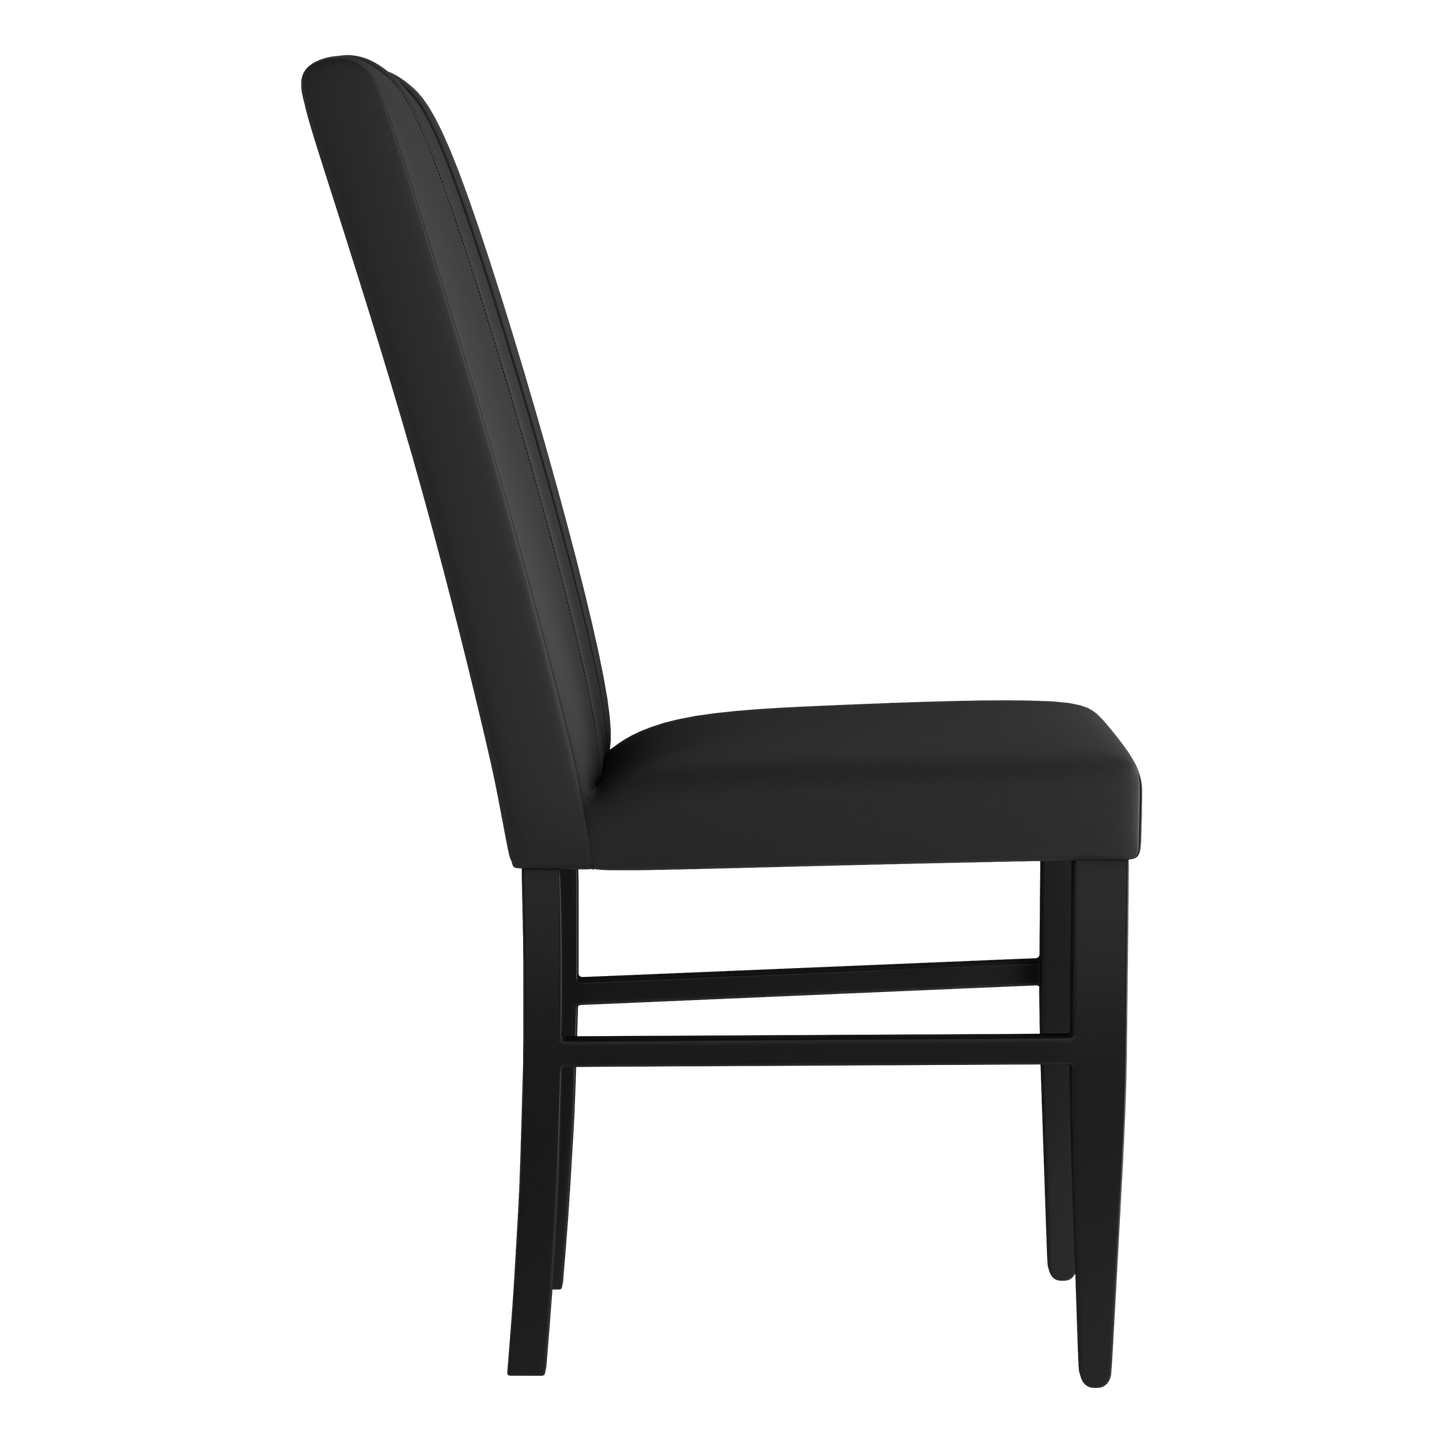 Side Chair 2000 with Winnipeg Jets Logo Set of 2